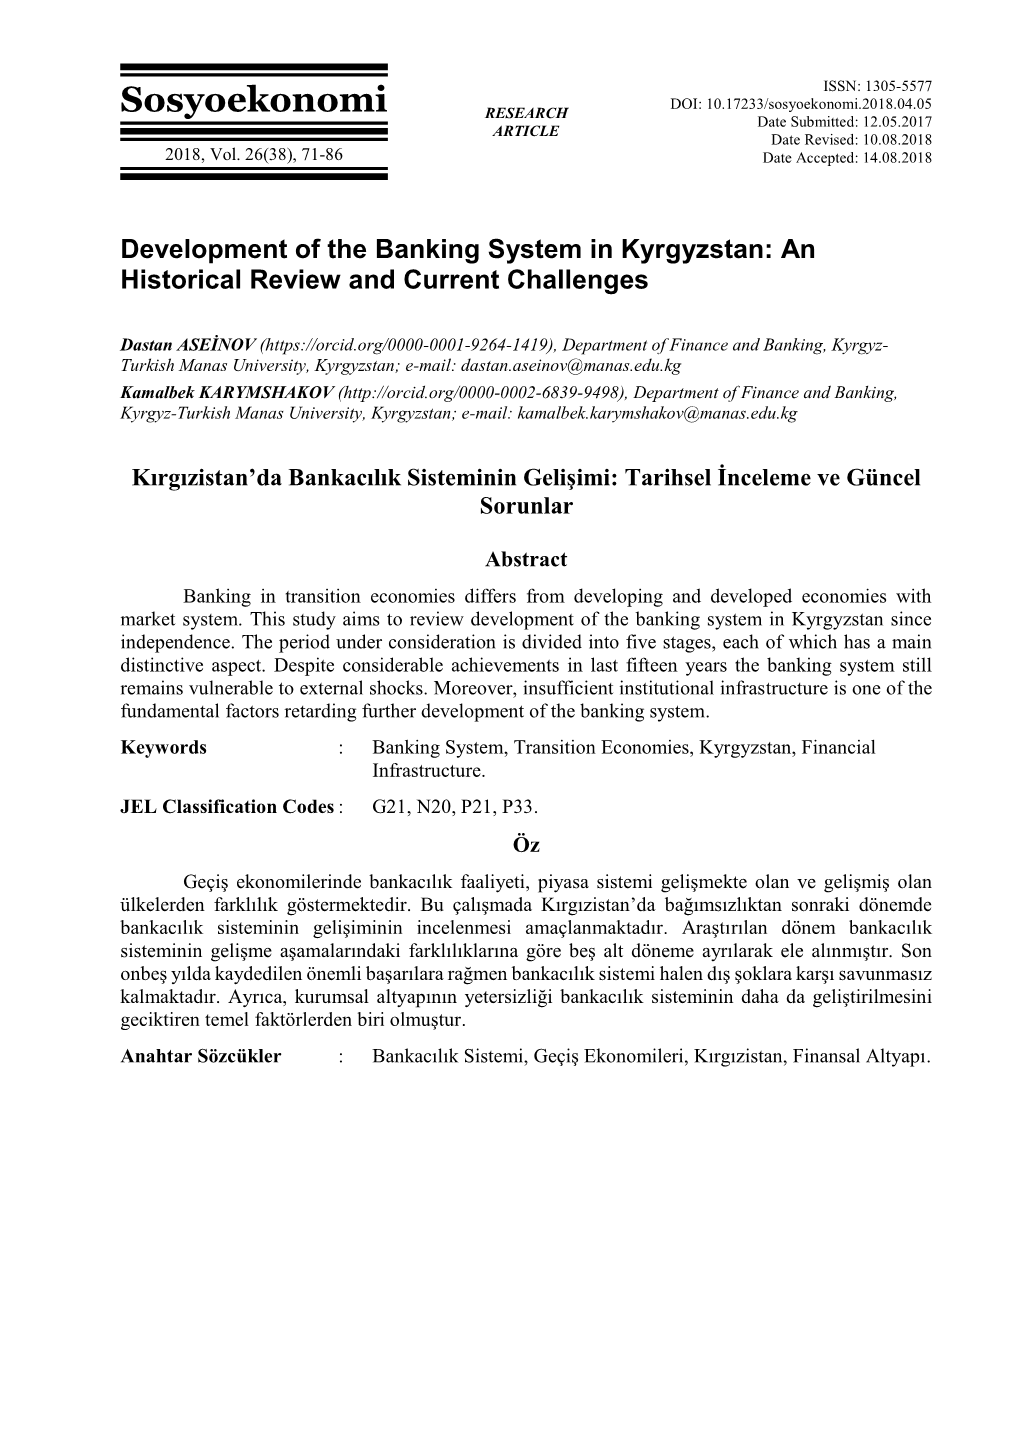 Development of the Banking System in Kyrgyzstan: an Historical Review and Current Challenges